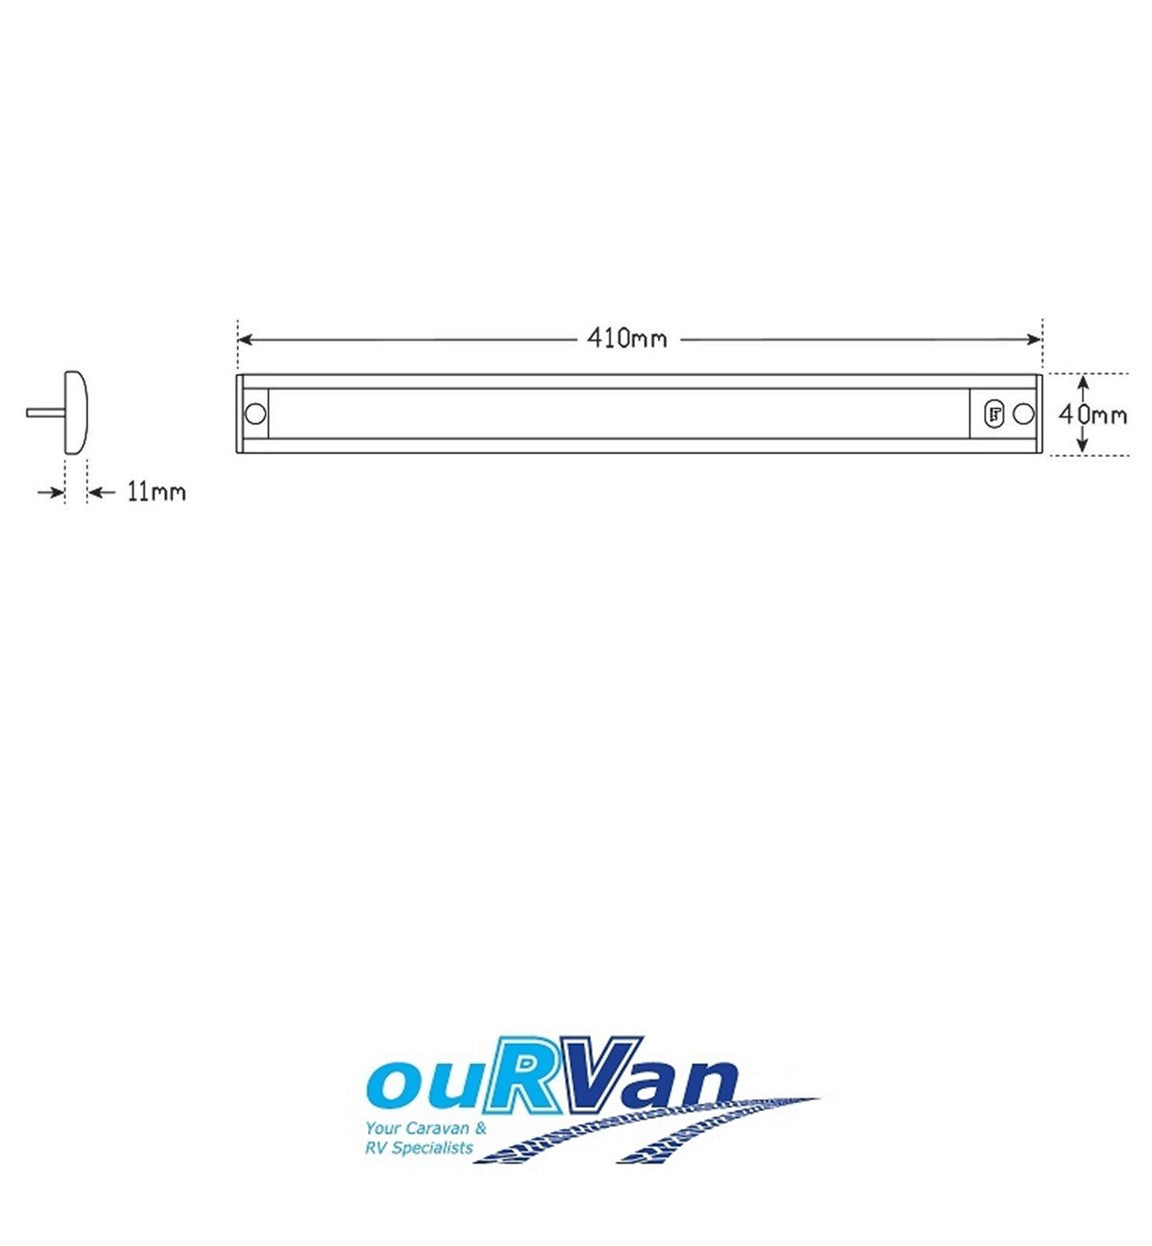 LED 410MM BAR STRIP LAMP LIGHT WITH TOUCH ON/OFF SENSOR